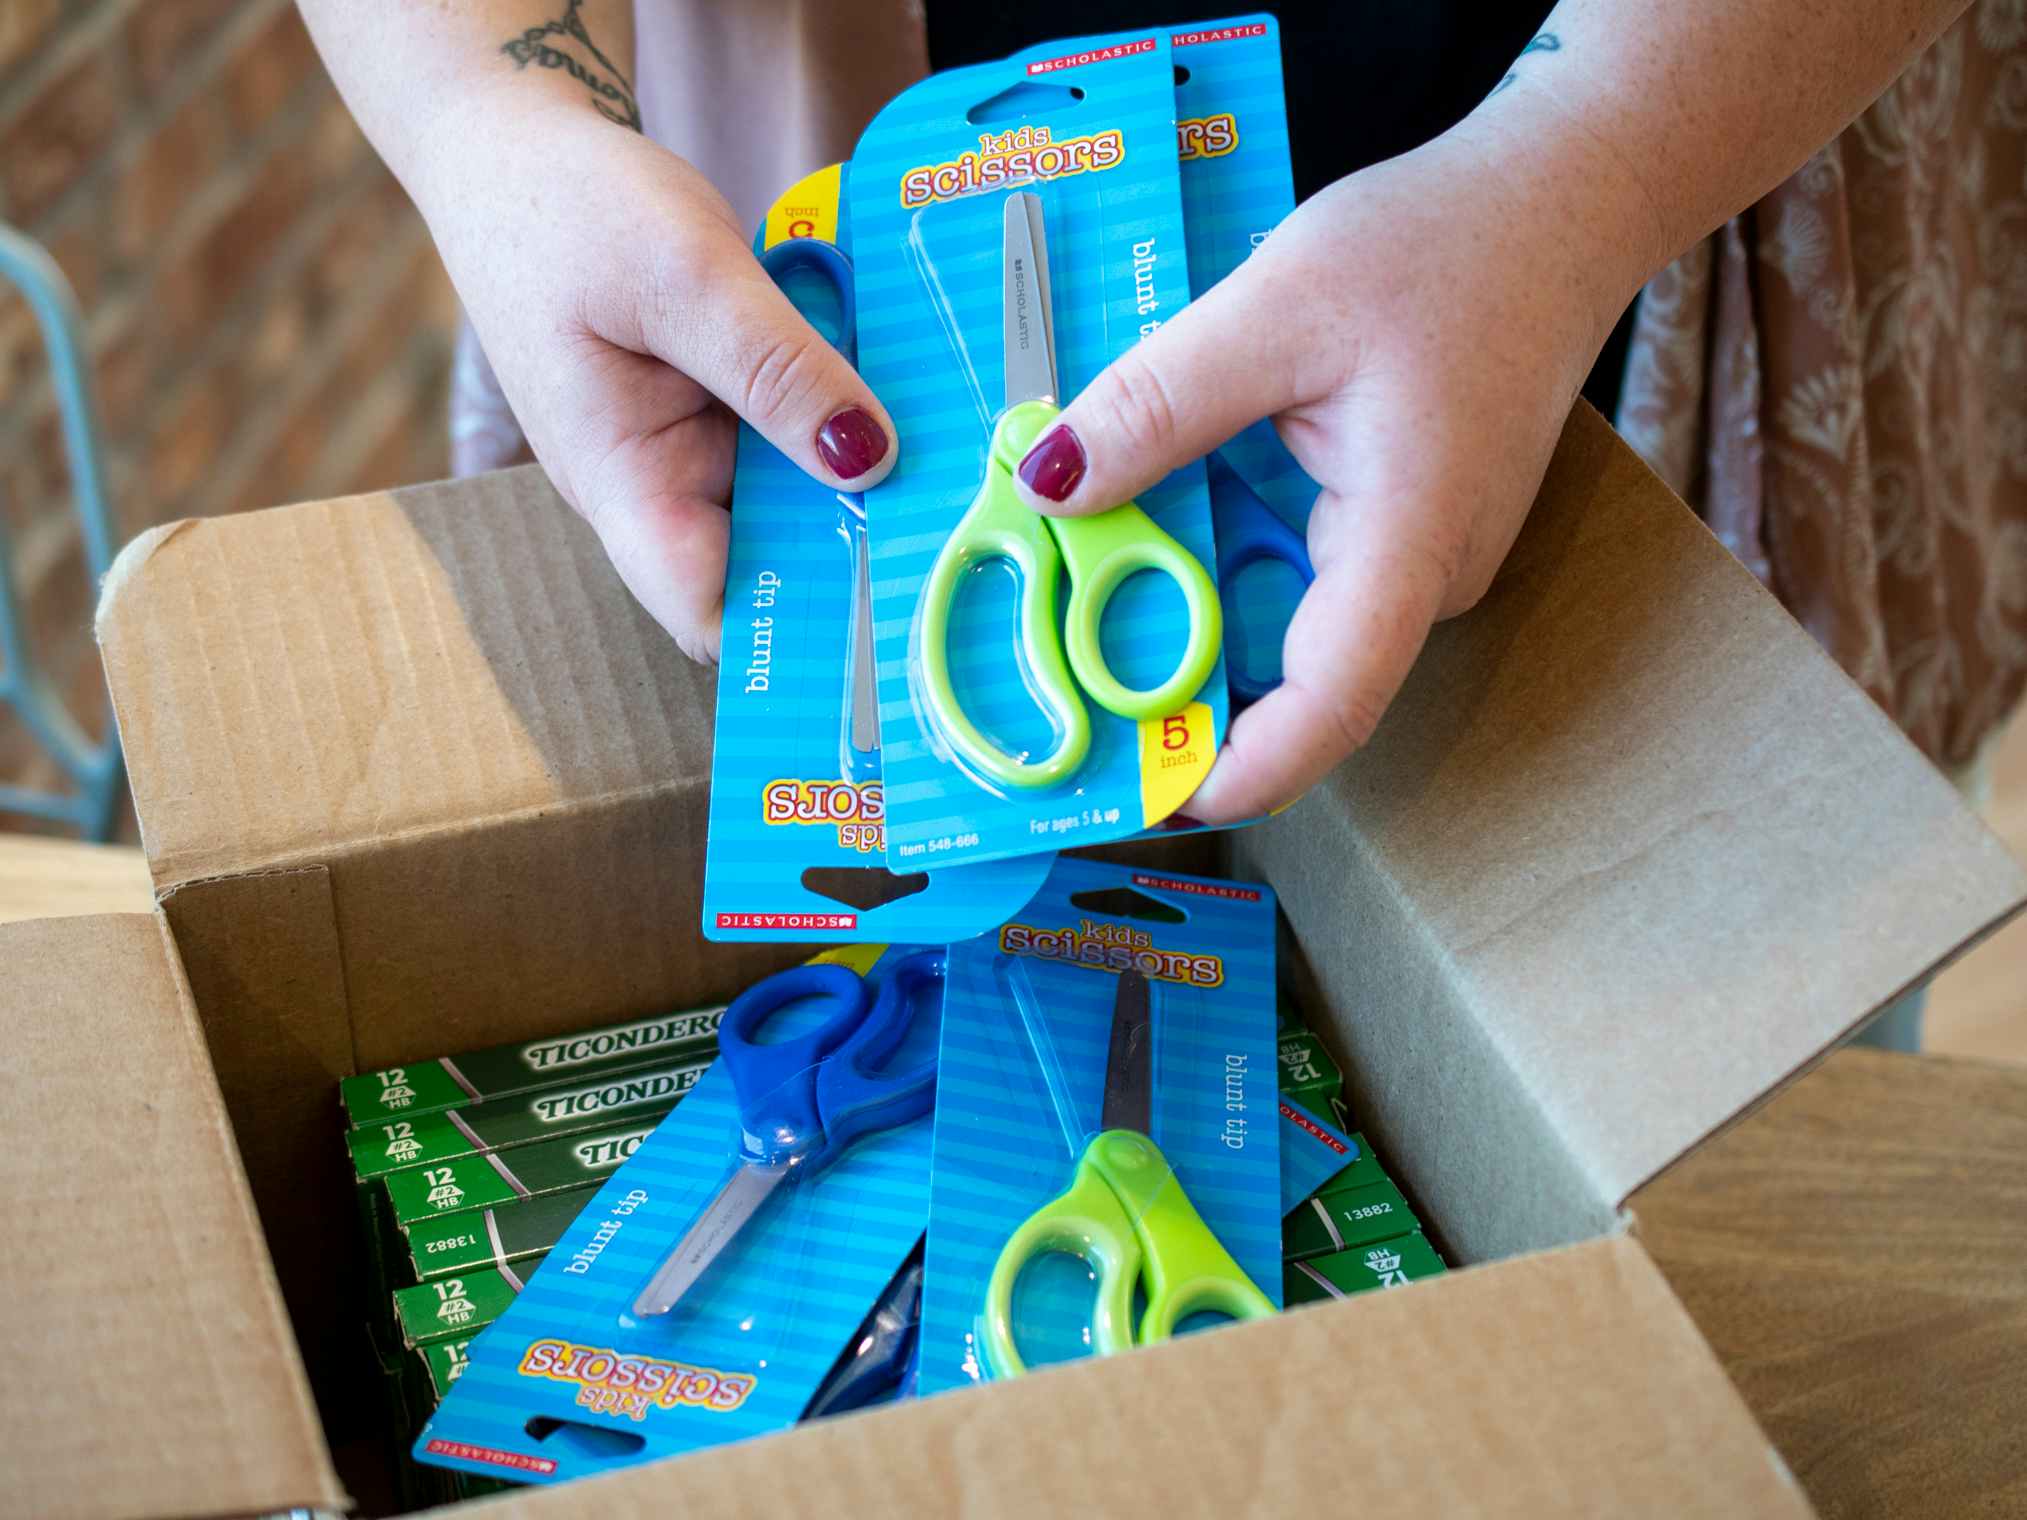 A person taking multiple pairs of scissors out of a shipping box with more scissors and boxes of pencils in it.